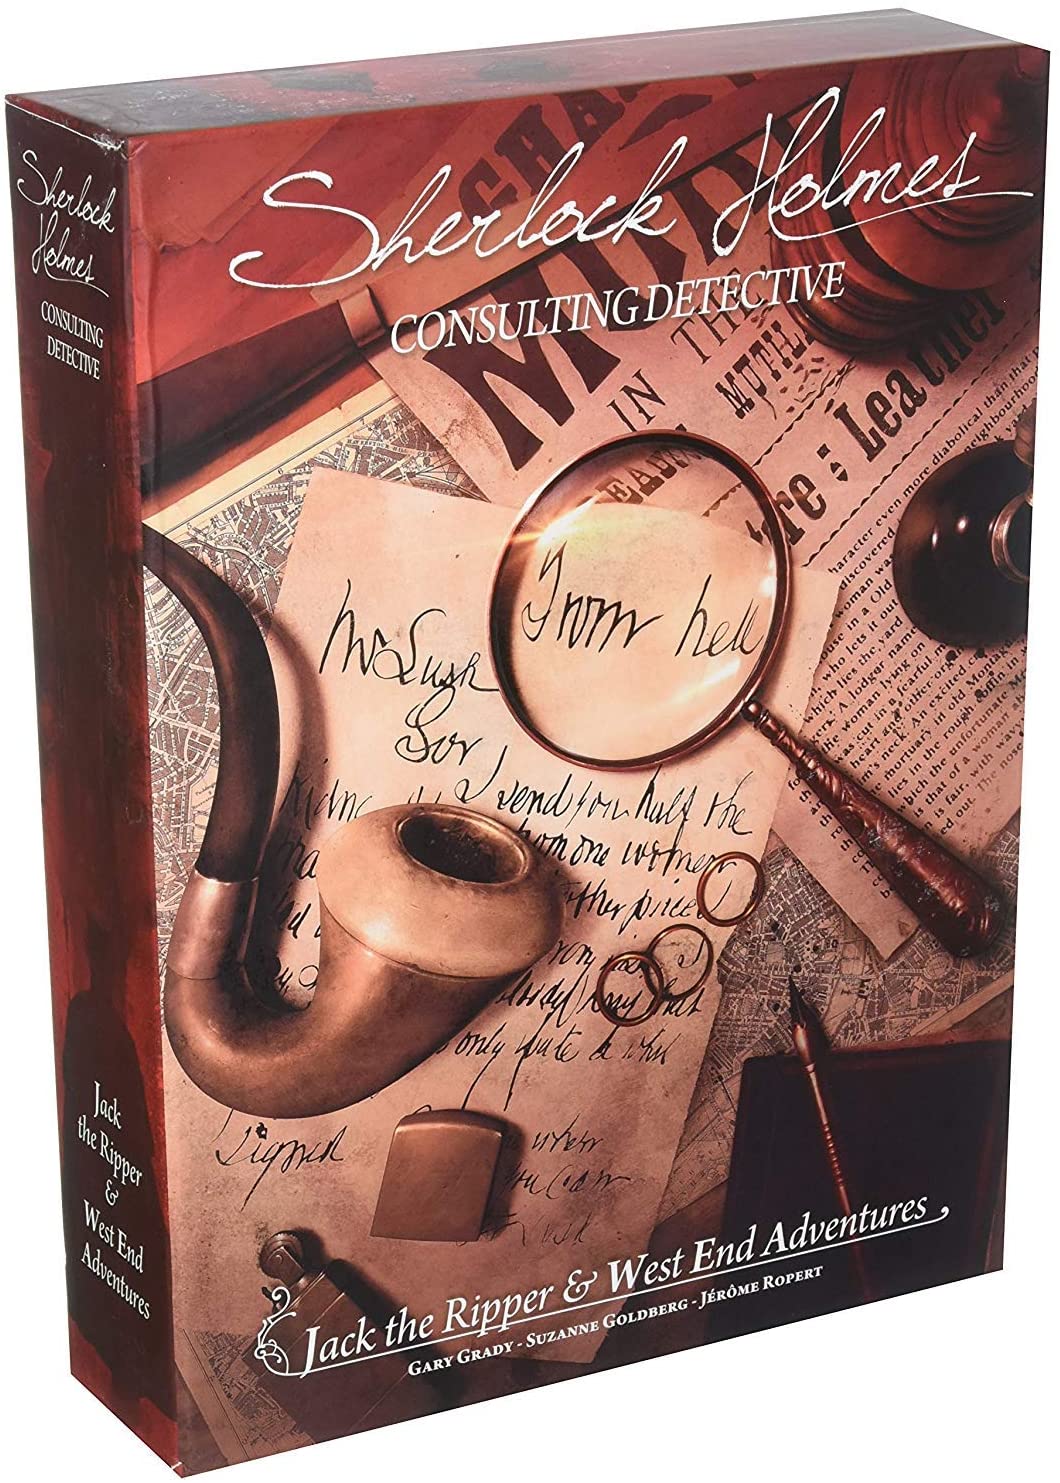 Sherlock Holmes: Consulting Detective - Jack the Ripper and West End Adventures (stand alone)